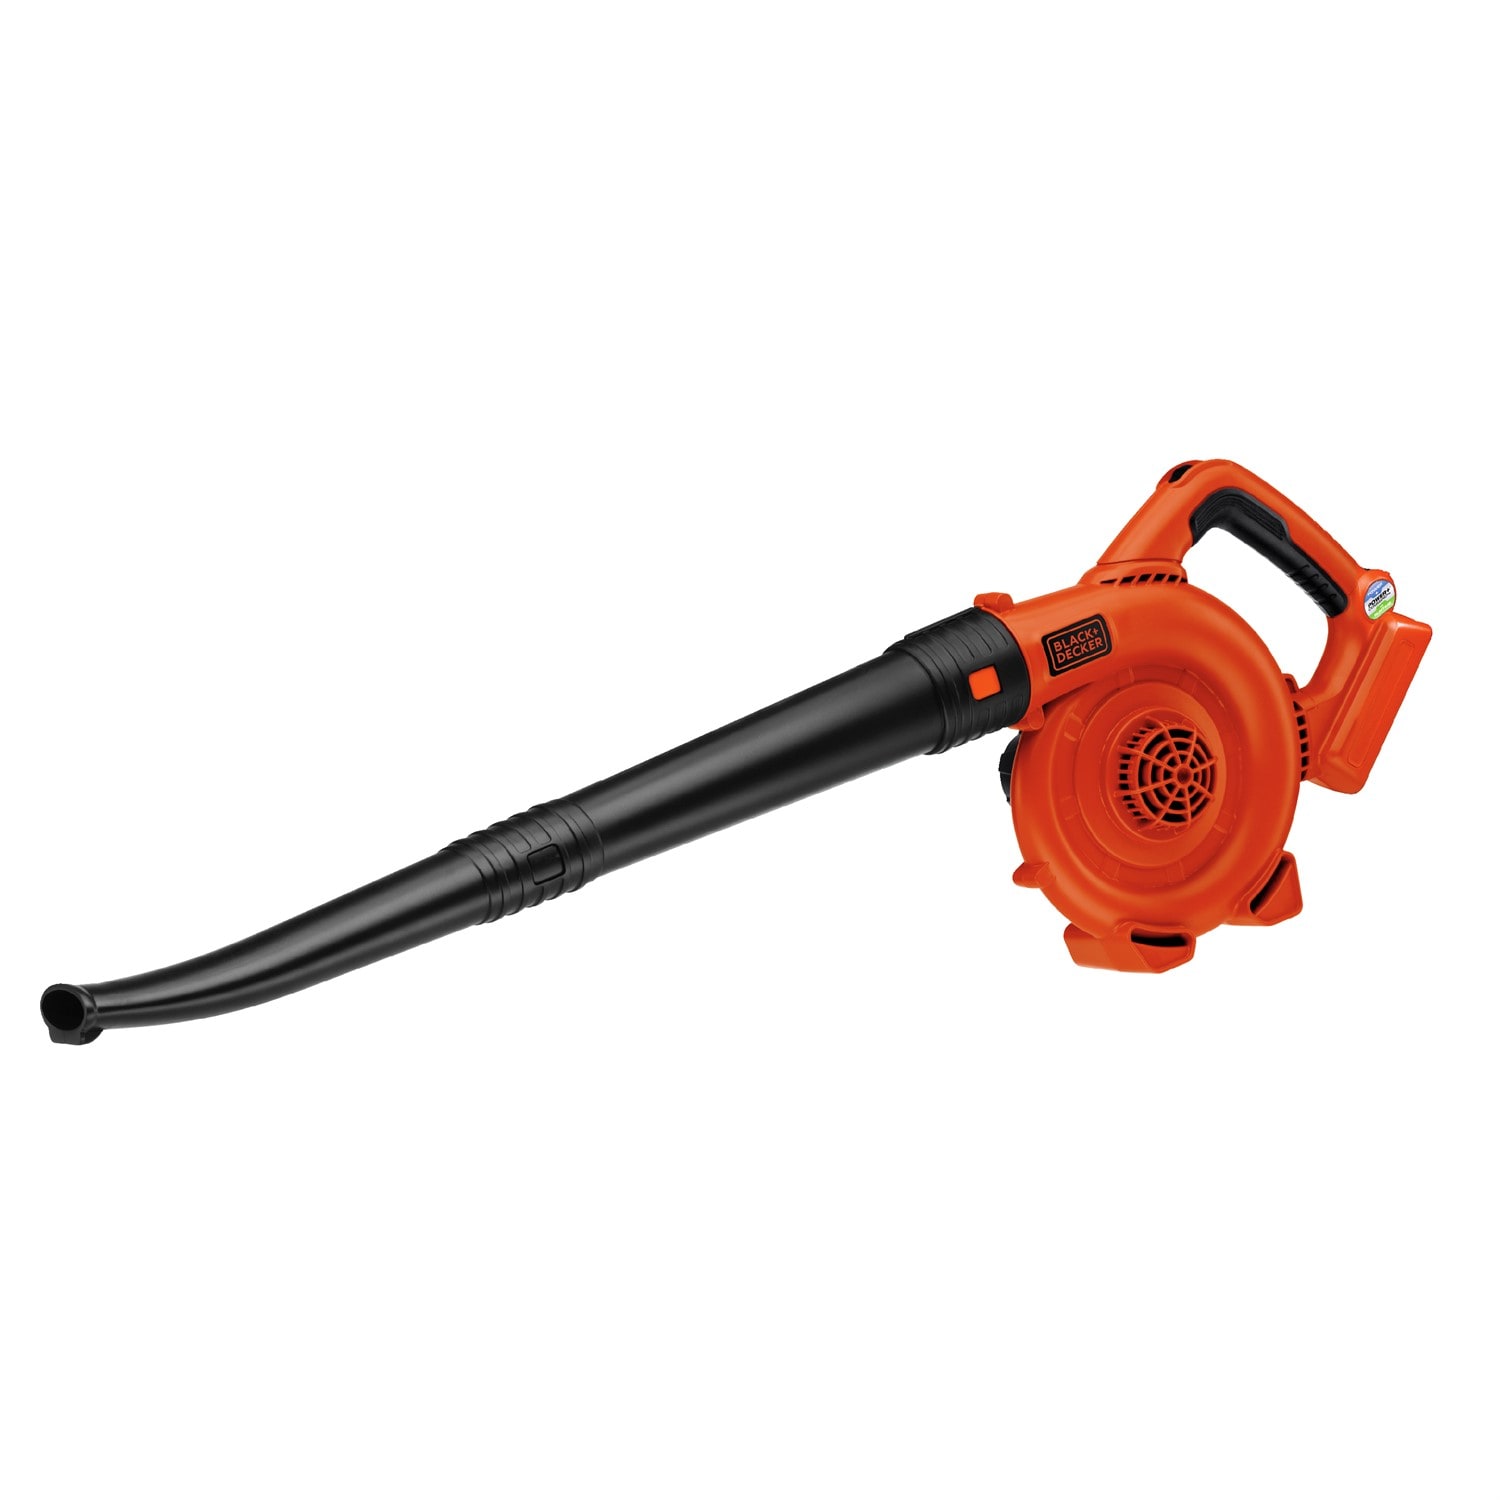 Get ahead of the season and save with BLACK+DECKER 40V Outdoor Power Tools: Leaf  Blower for $47 (Reg. $85), more